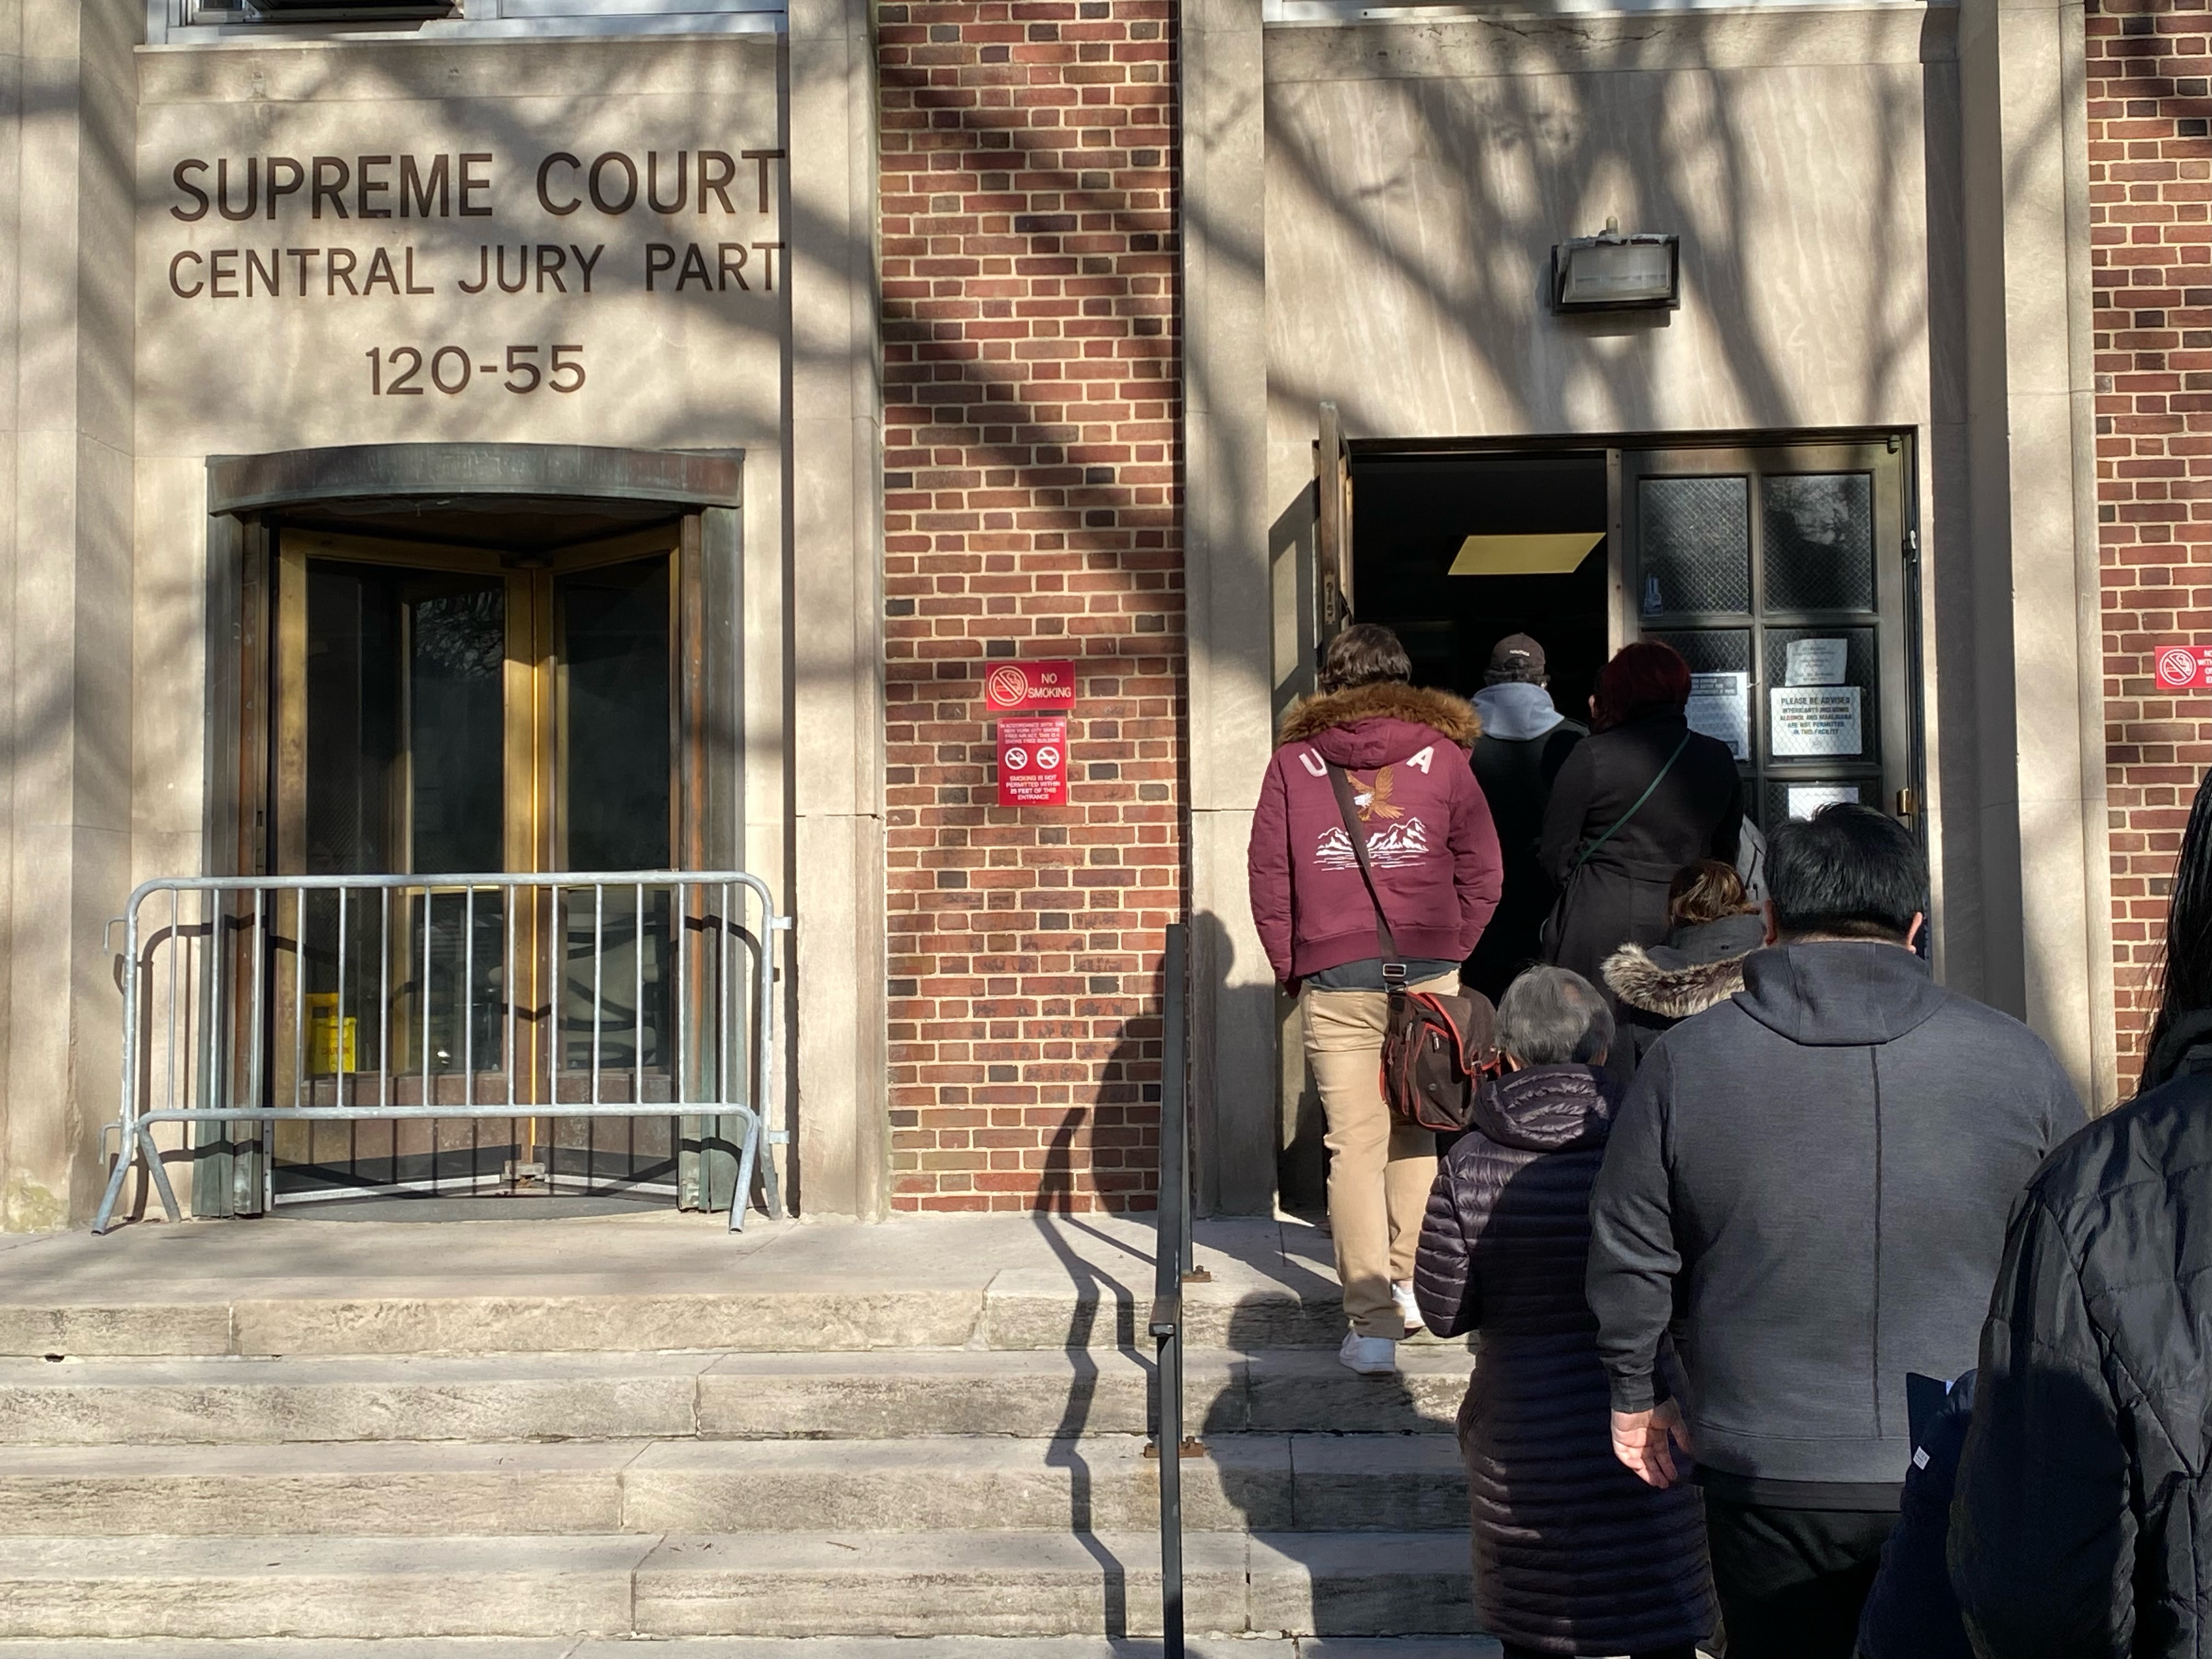 Jurors lining up to enter Supreme Court for Jury Duty, Queens, New York